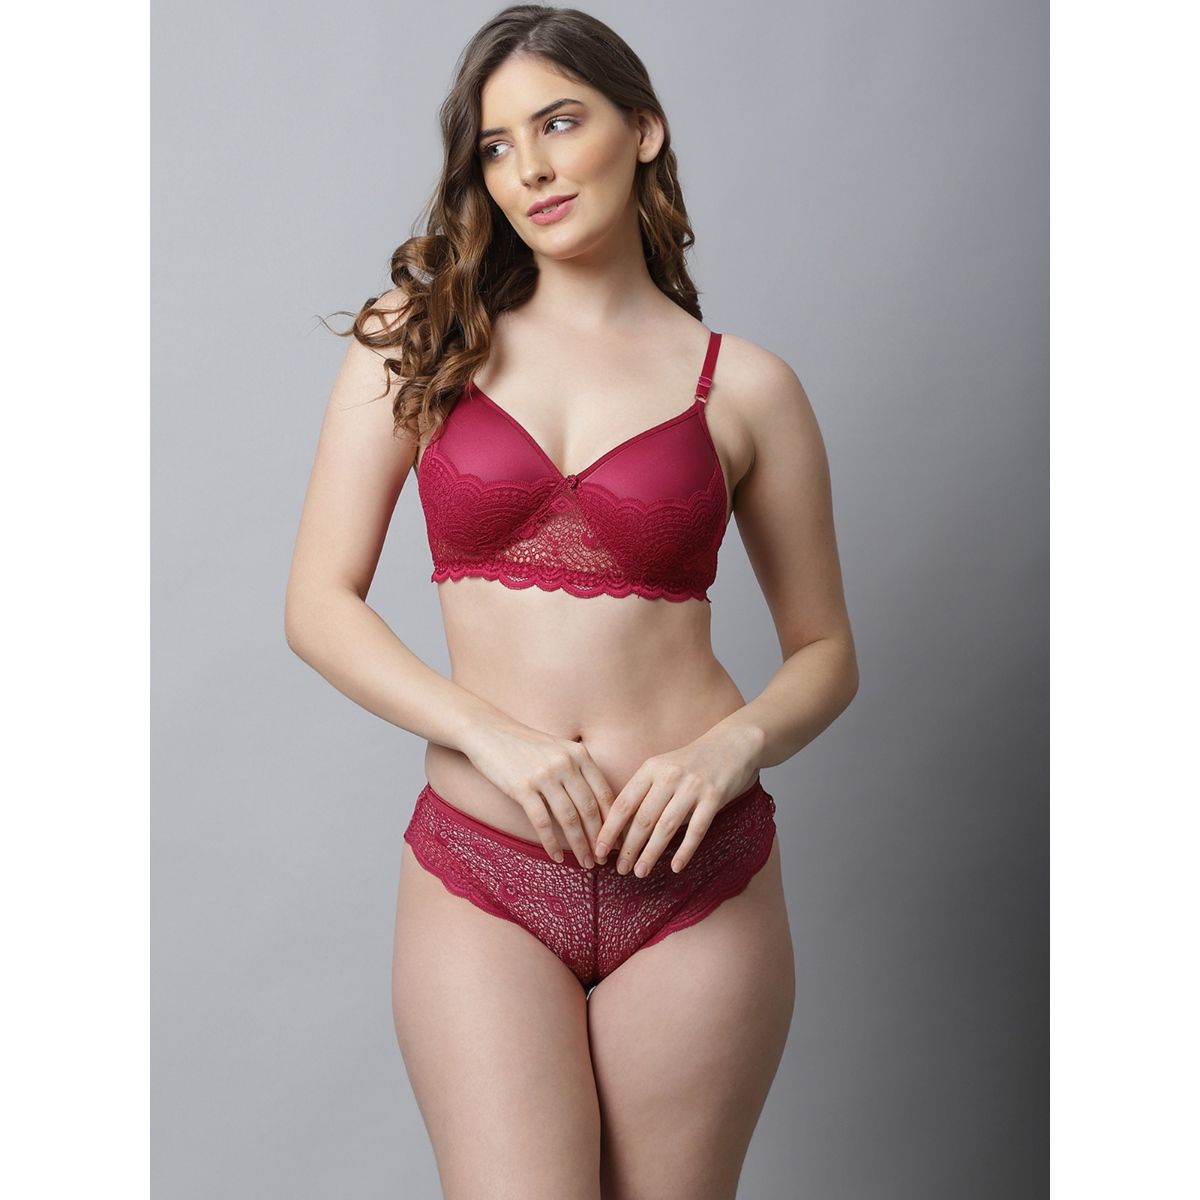 Buy PrettyCat PrettyCat Maroon Lace Non-Wired Lightly Padded Camisole Bra  PCSB20029-MAH-36B at Redfynd